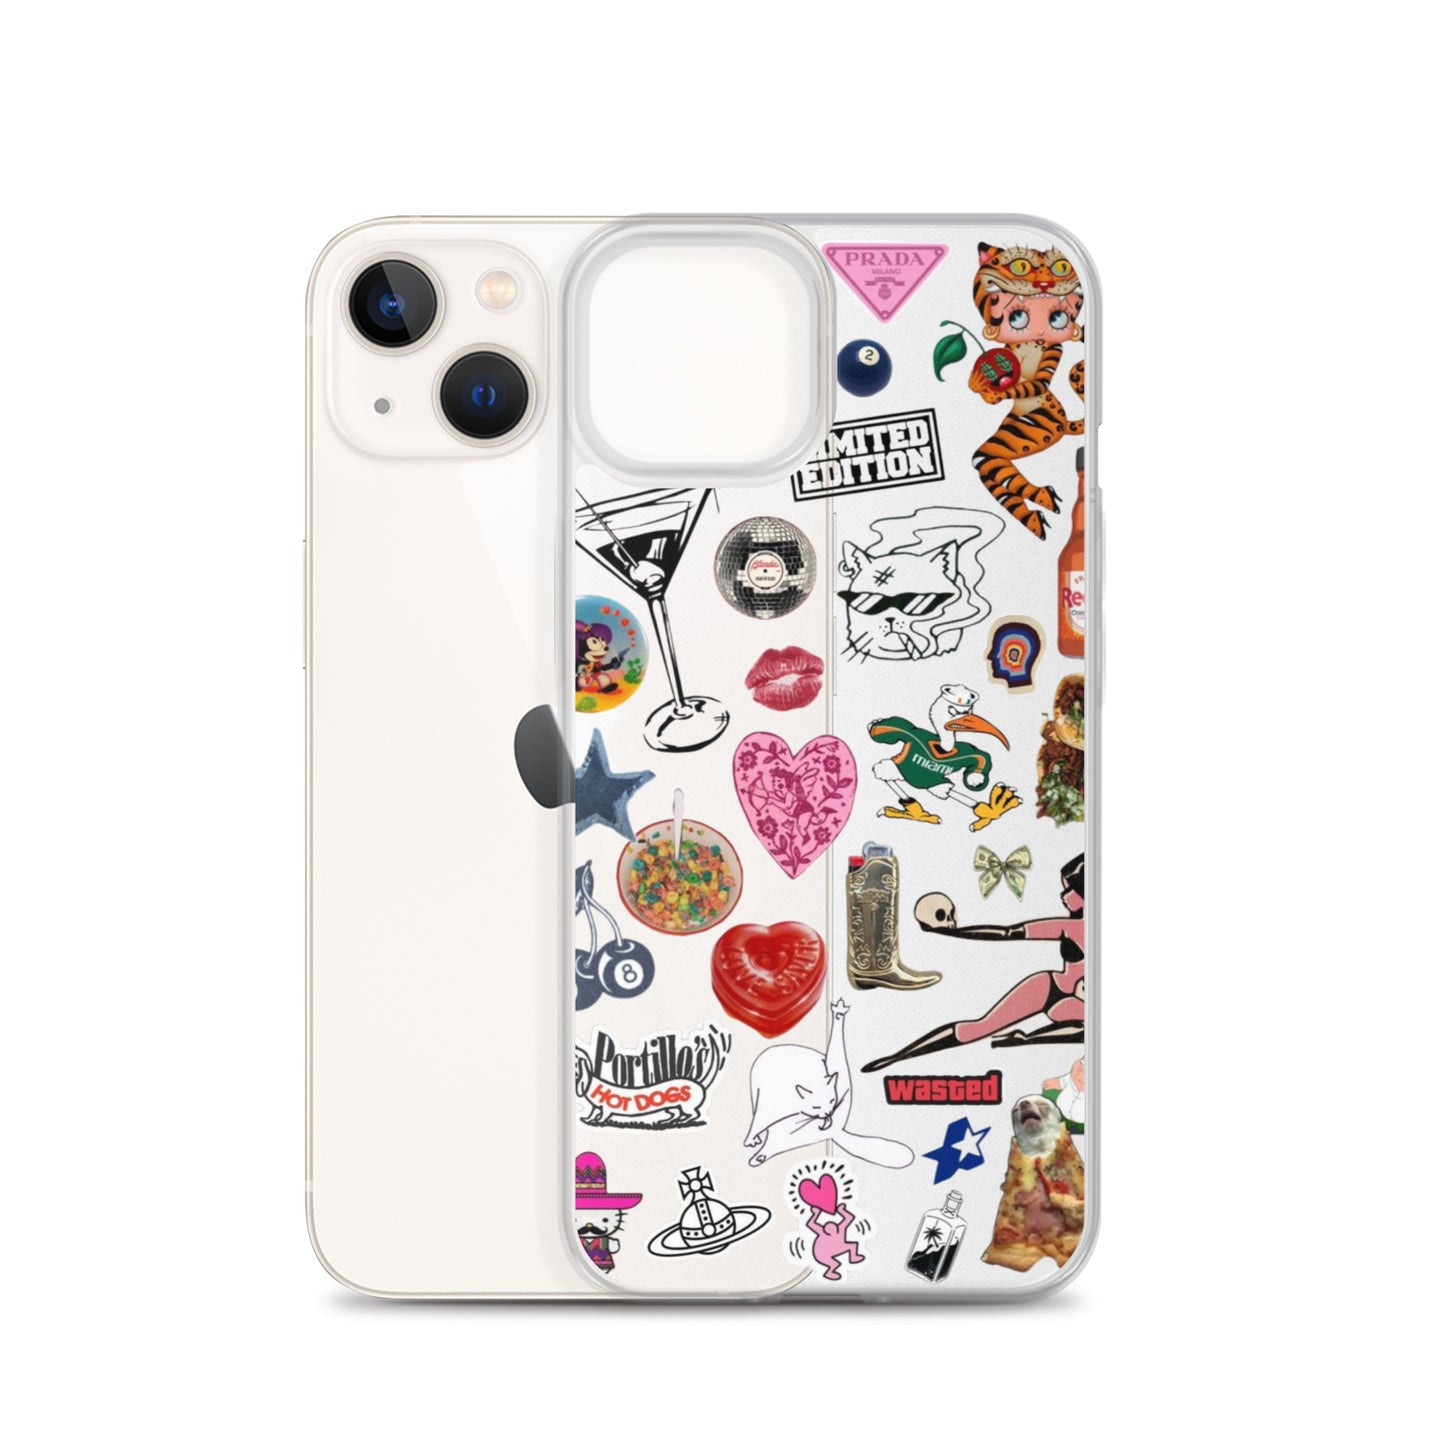 She's A Girl's Girl iPhone® Case